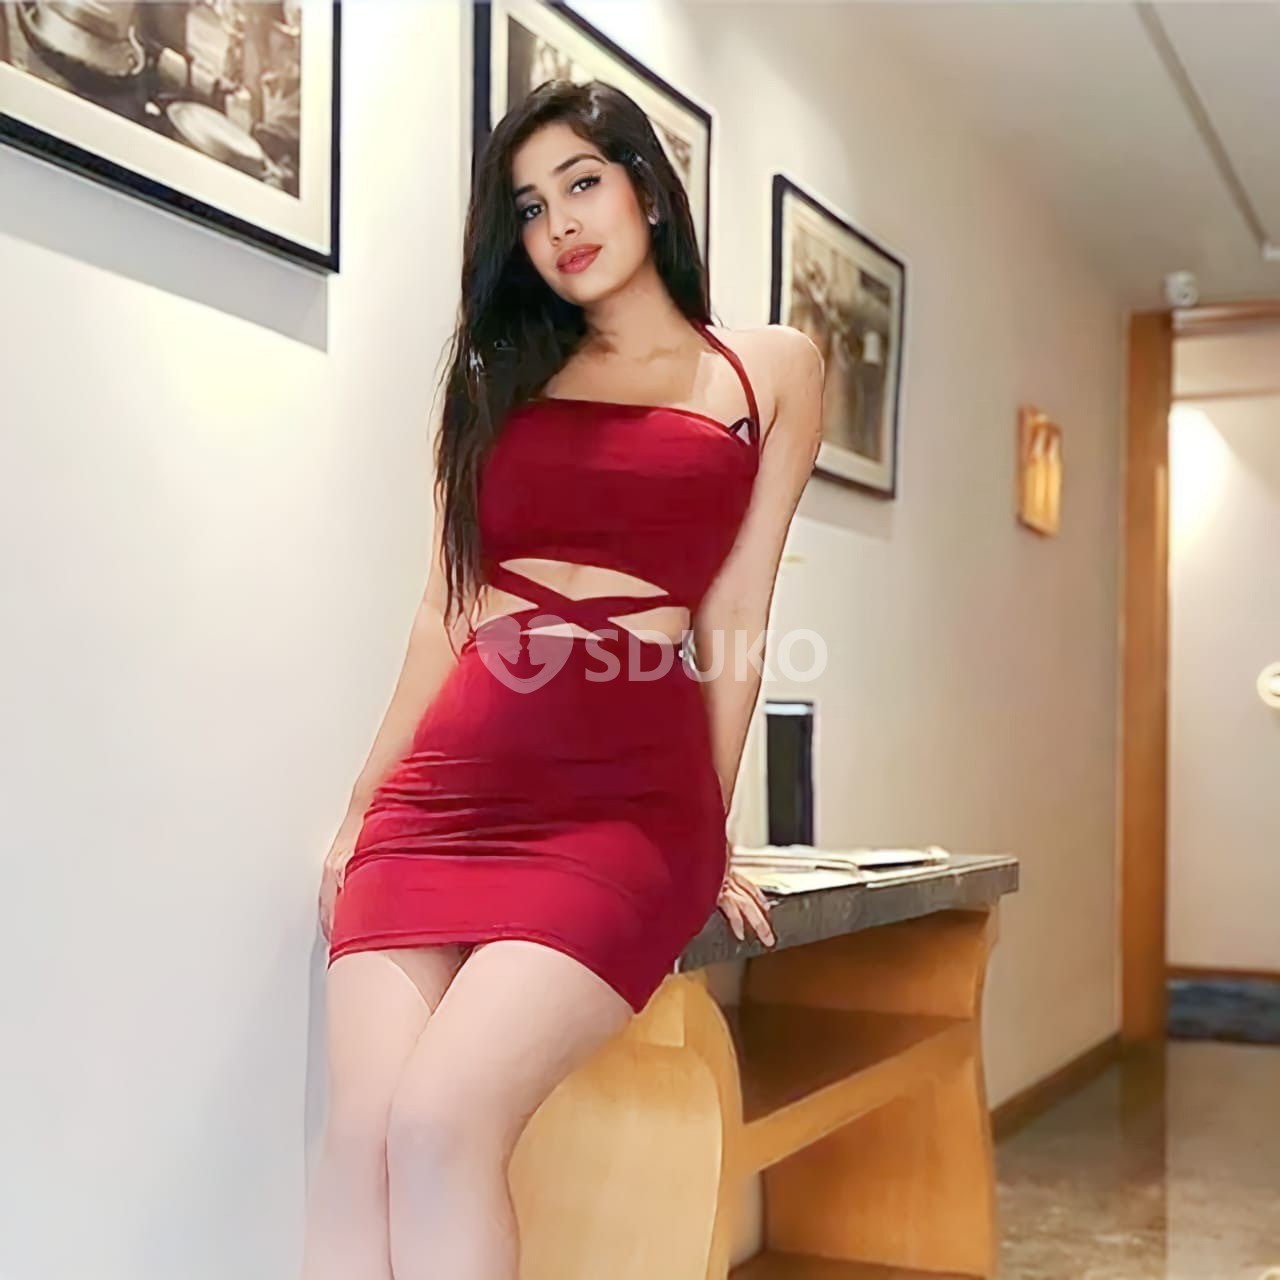 BARMER 💋BEST CALL GIRL INDEPENDENT ESCORT SERVICE IN LOW BUDGET